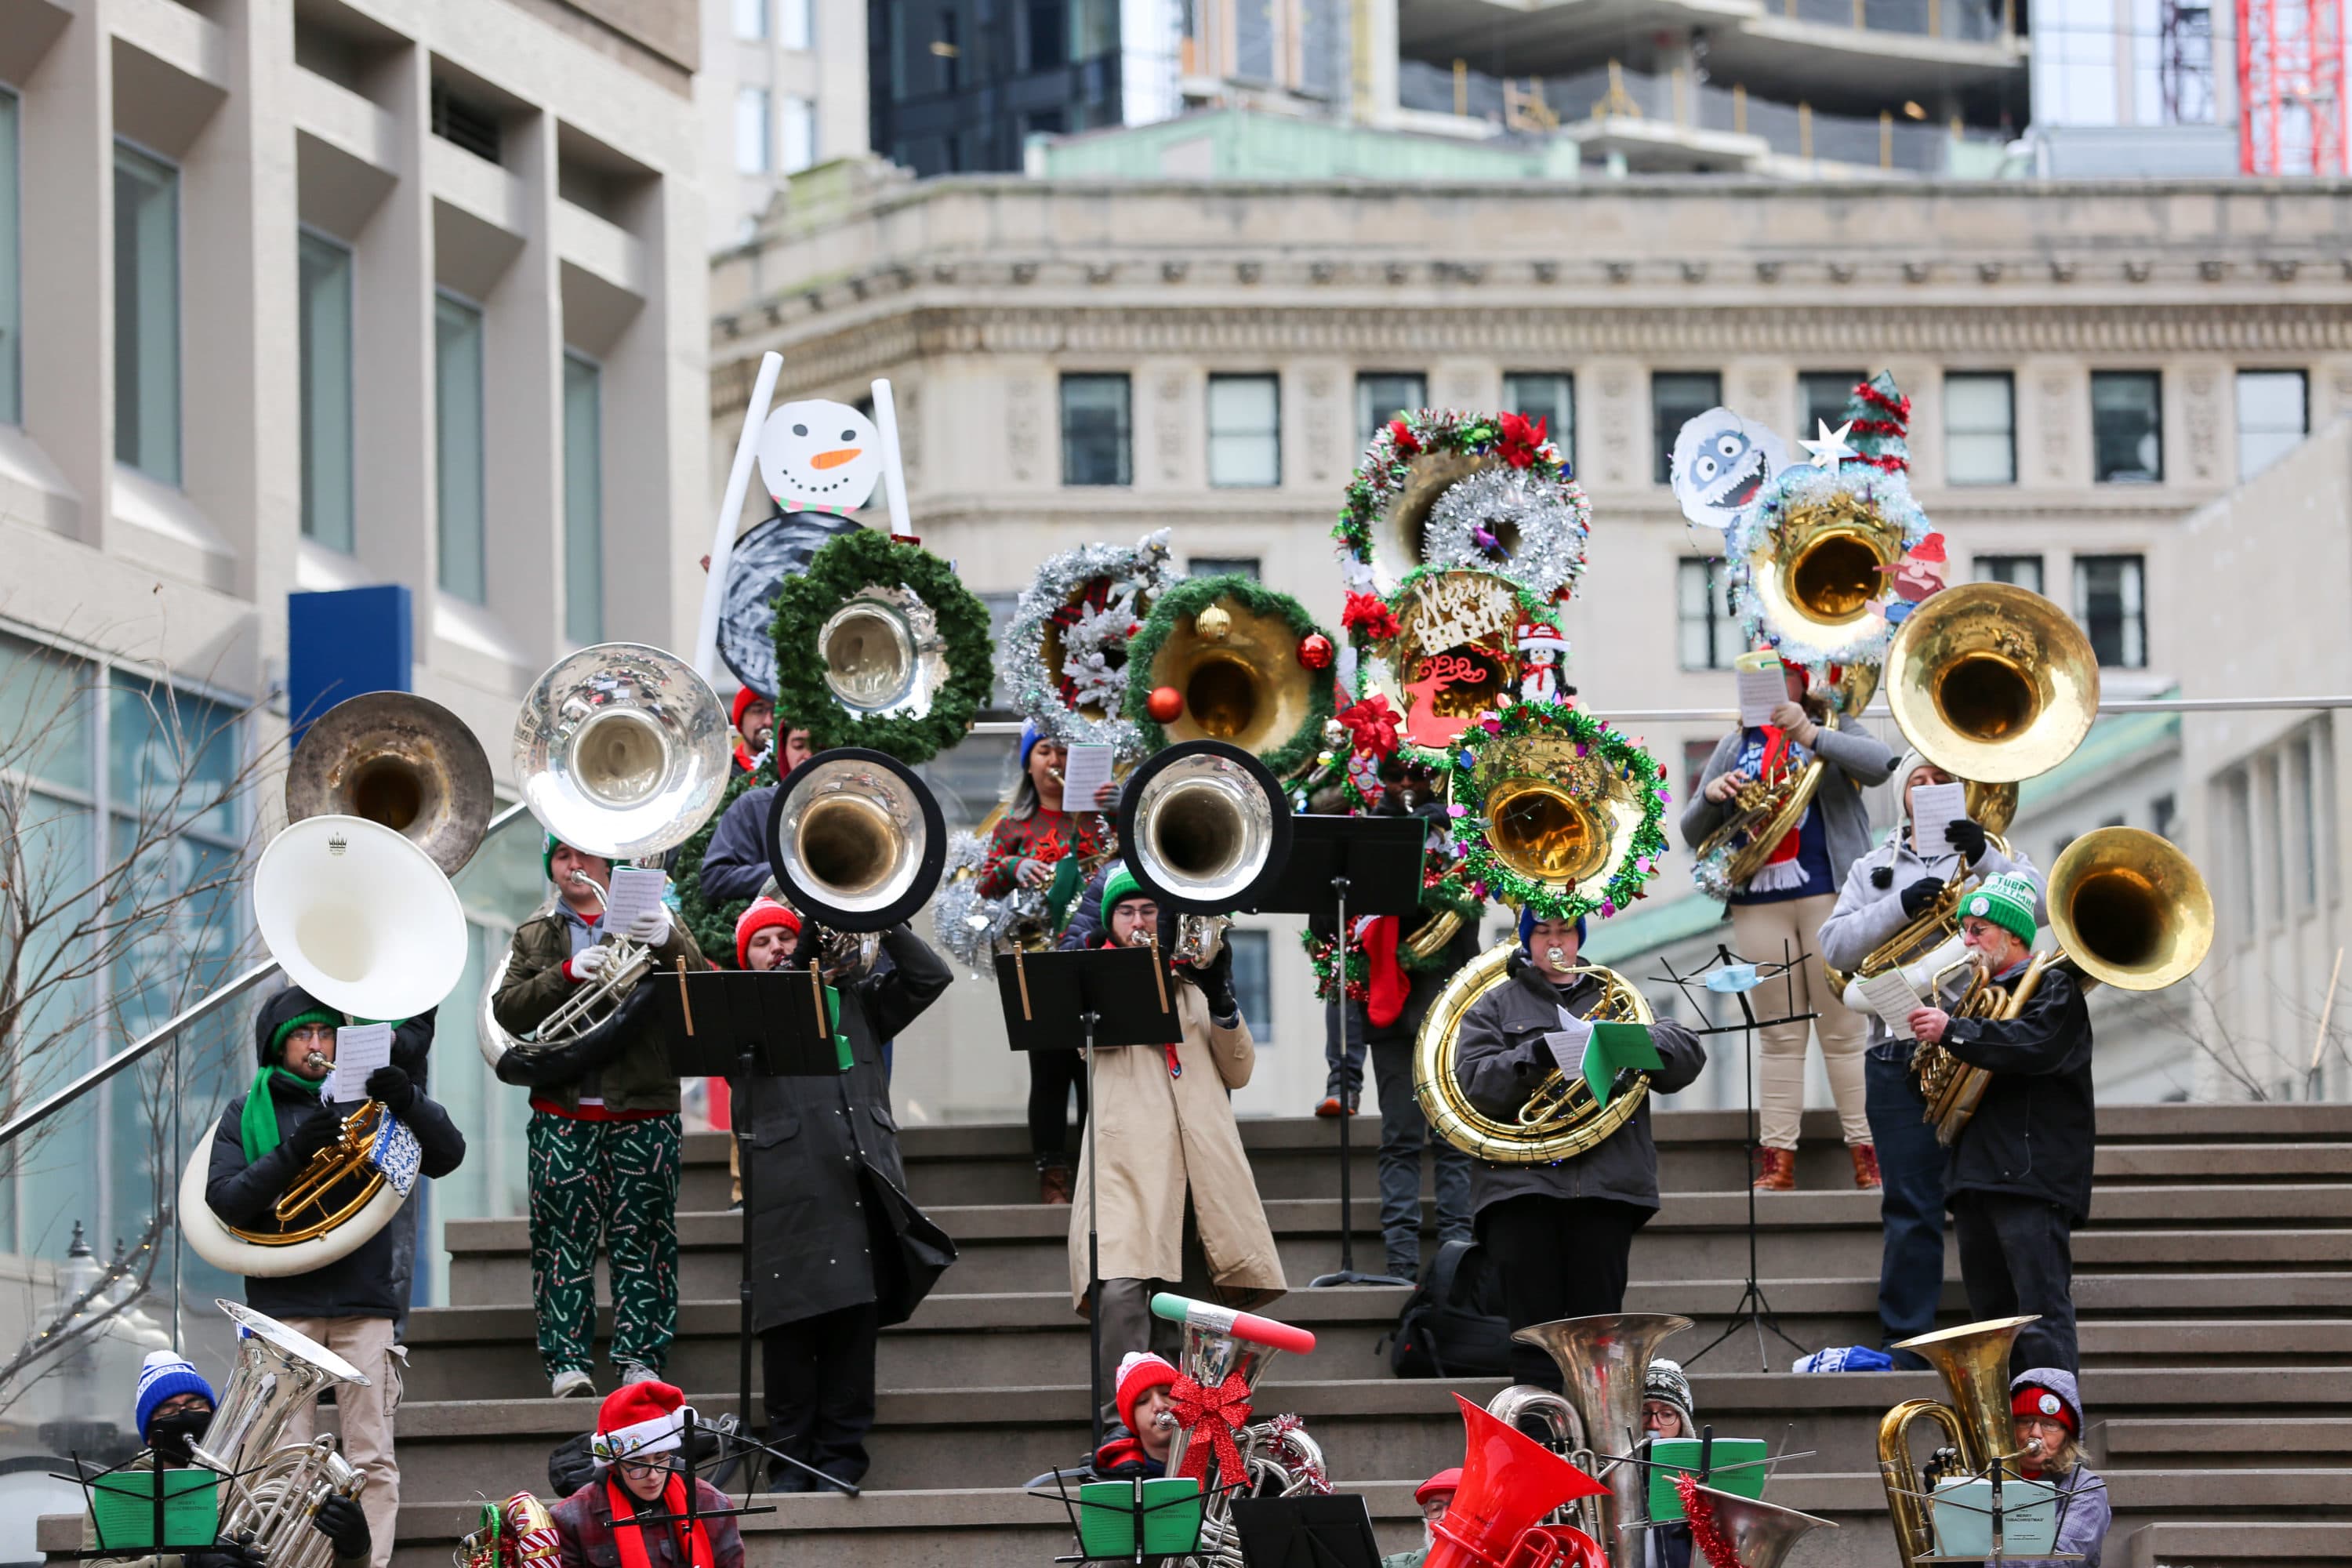 Sousaphone players rehearse for Boston &quot;TubaChristmas&quot; in Downtown Crossing. (Courtesy George Comeau)